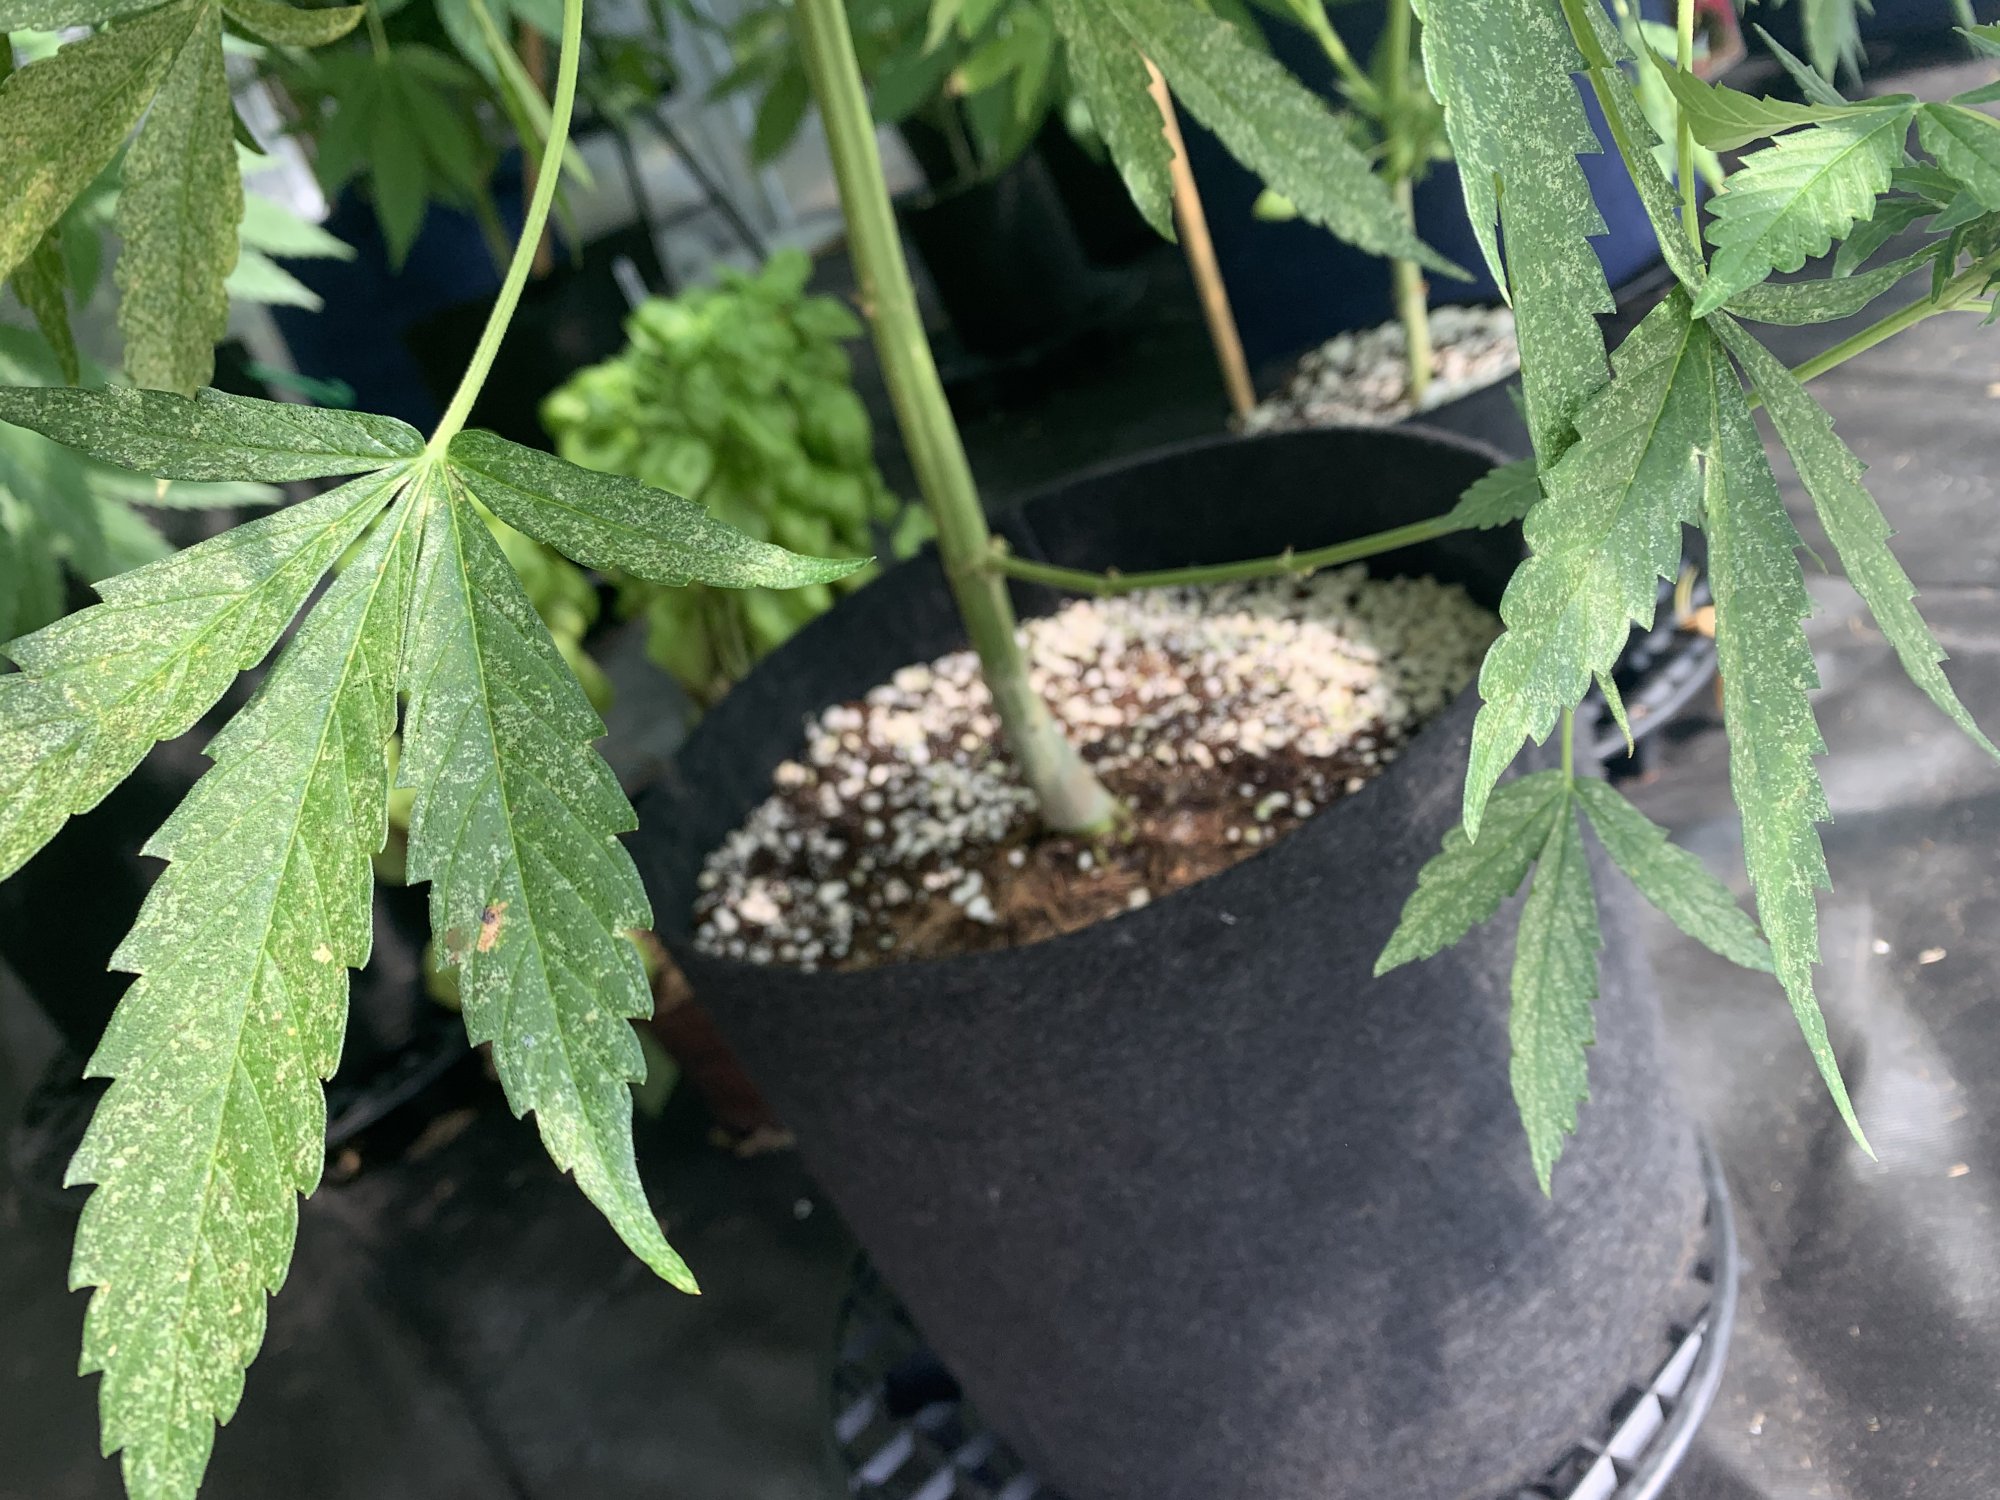 Chop or keep damaged leaves from pests